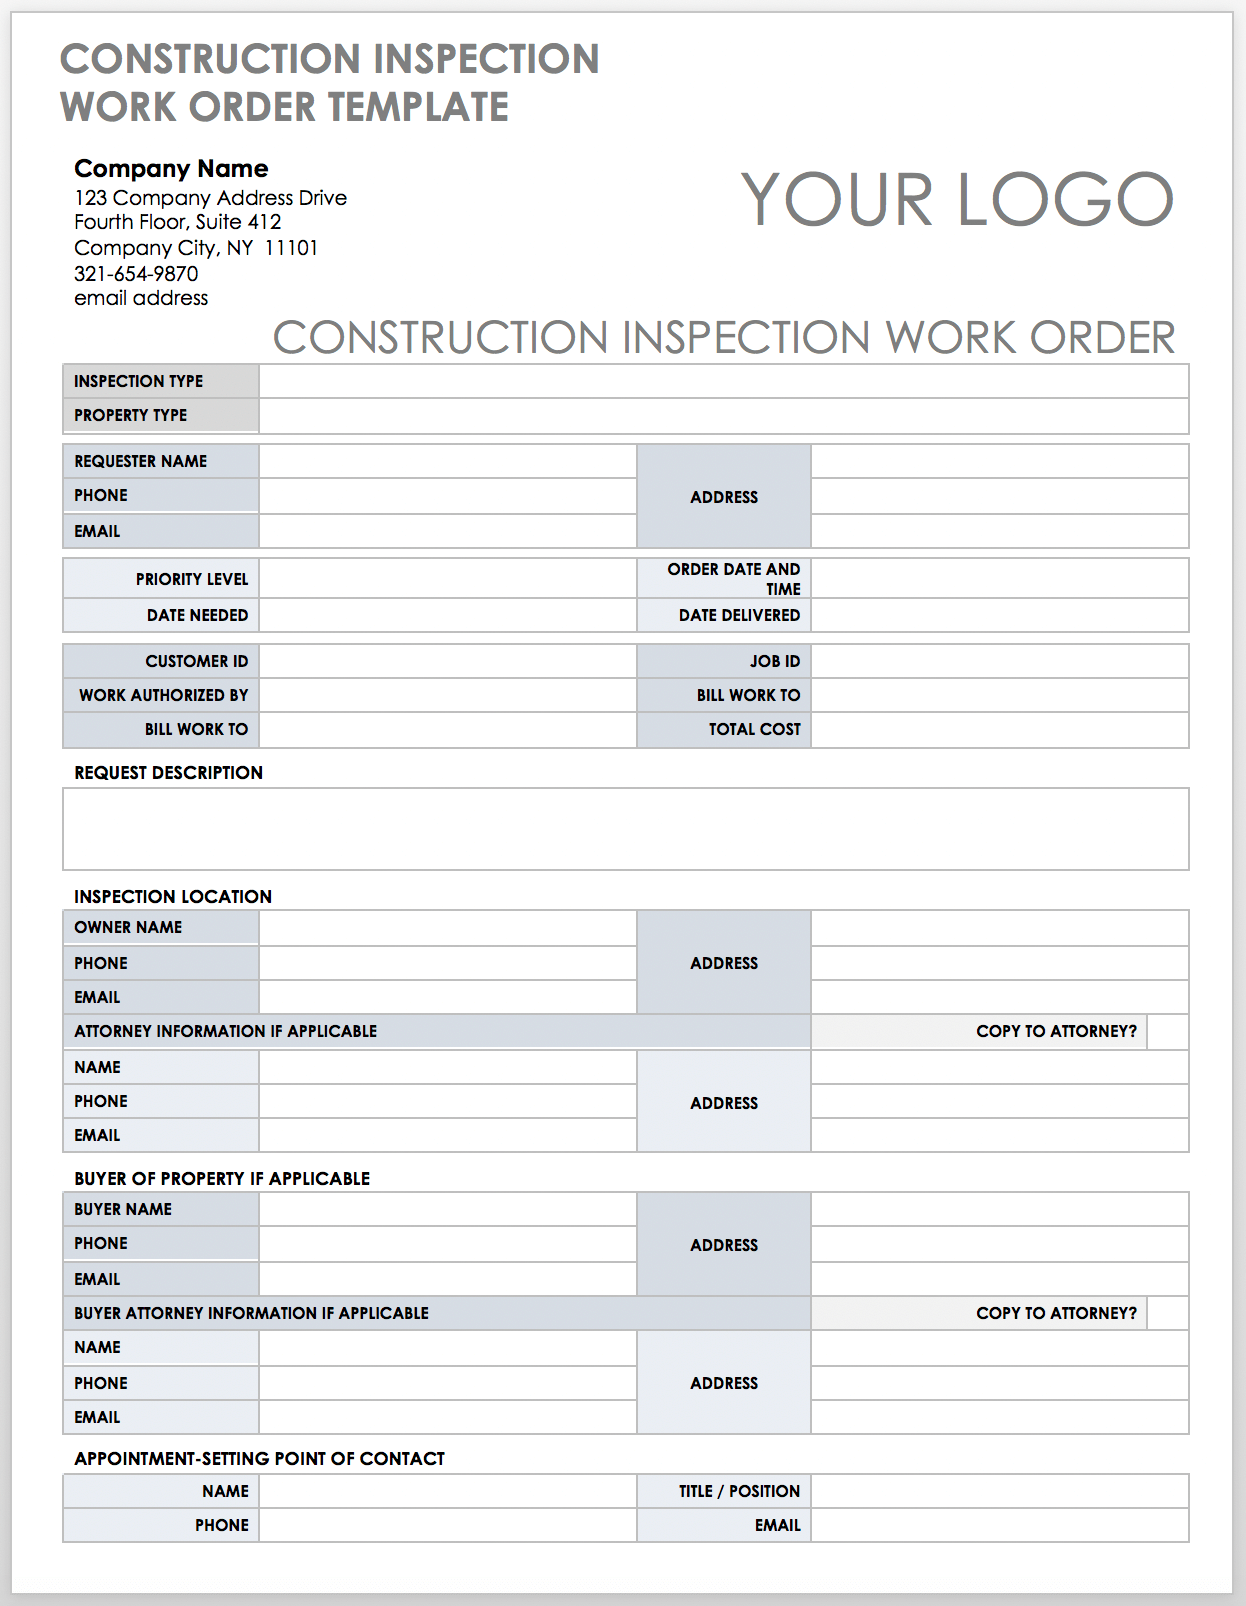 Construction Inspection Work Order Template